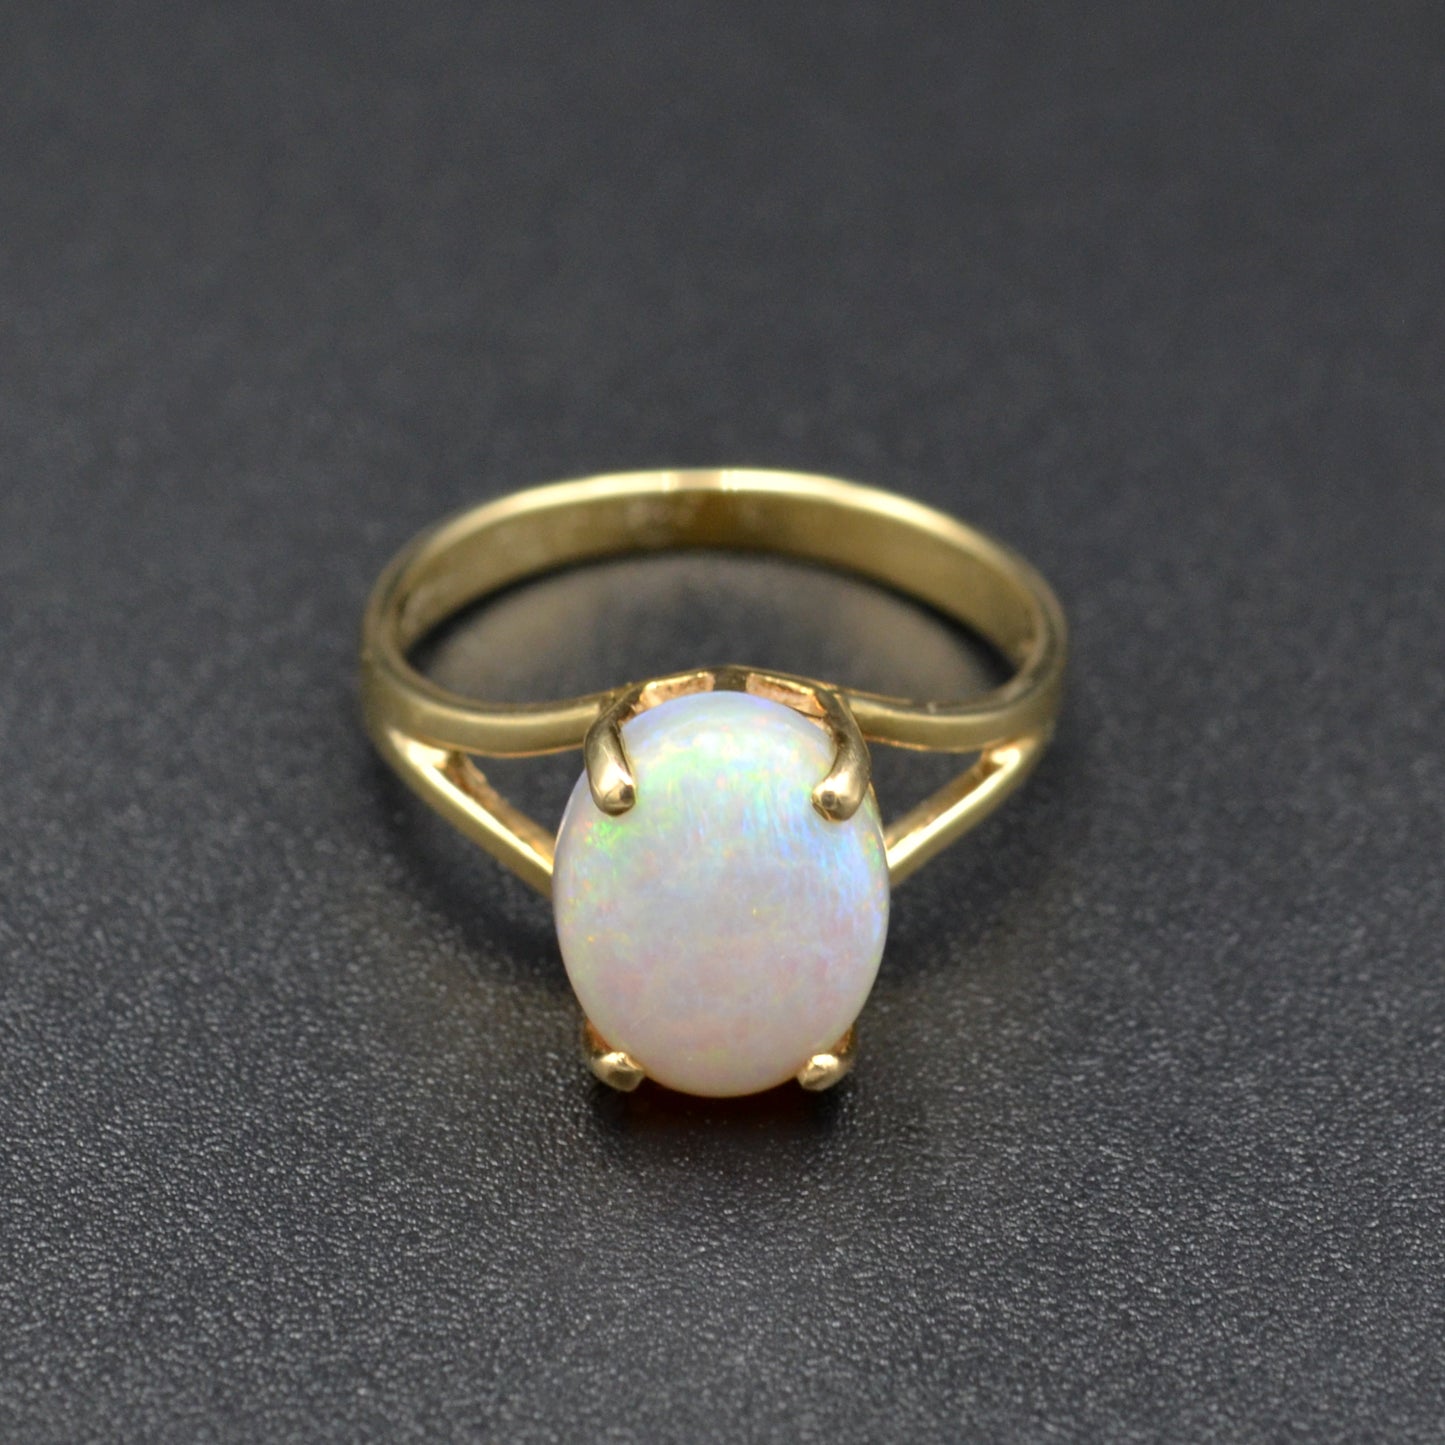 Vintage White Opal and 14k Gold Solitaire Ring